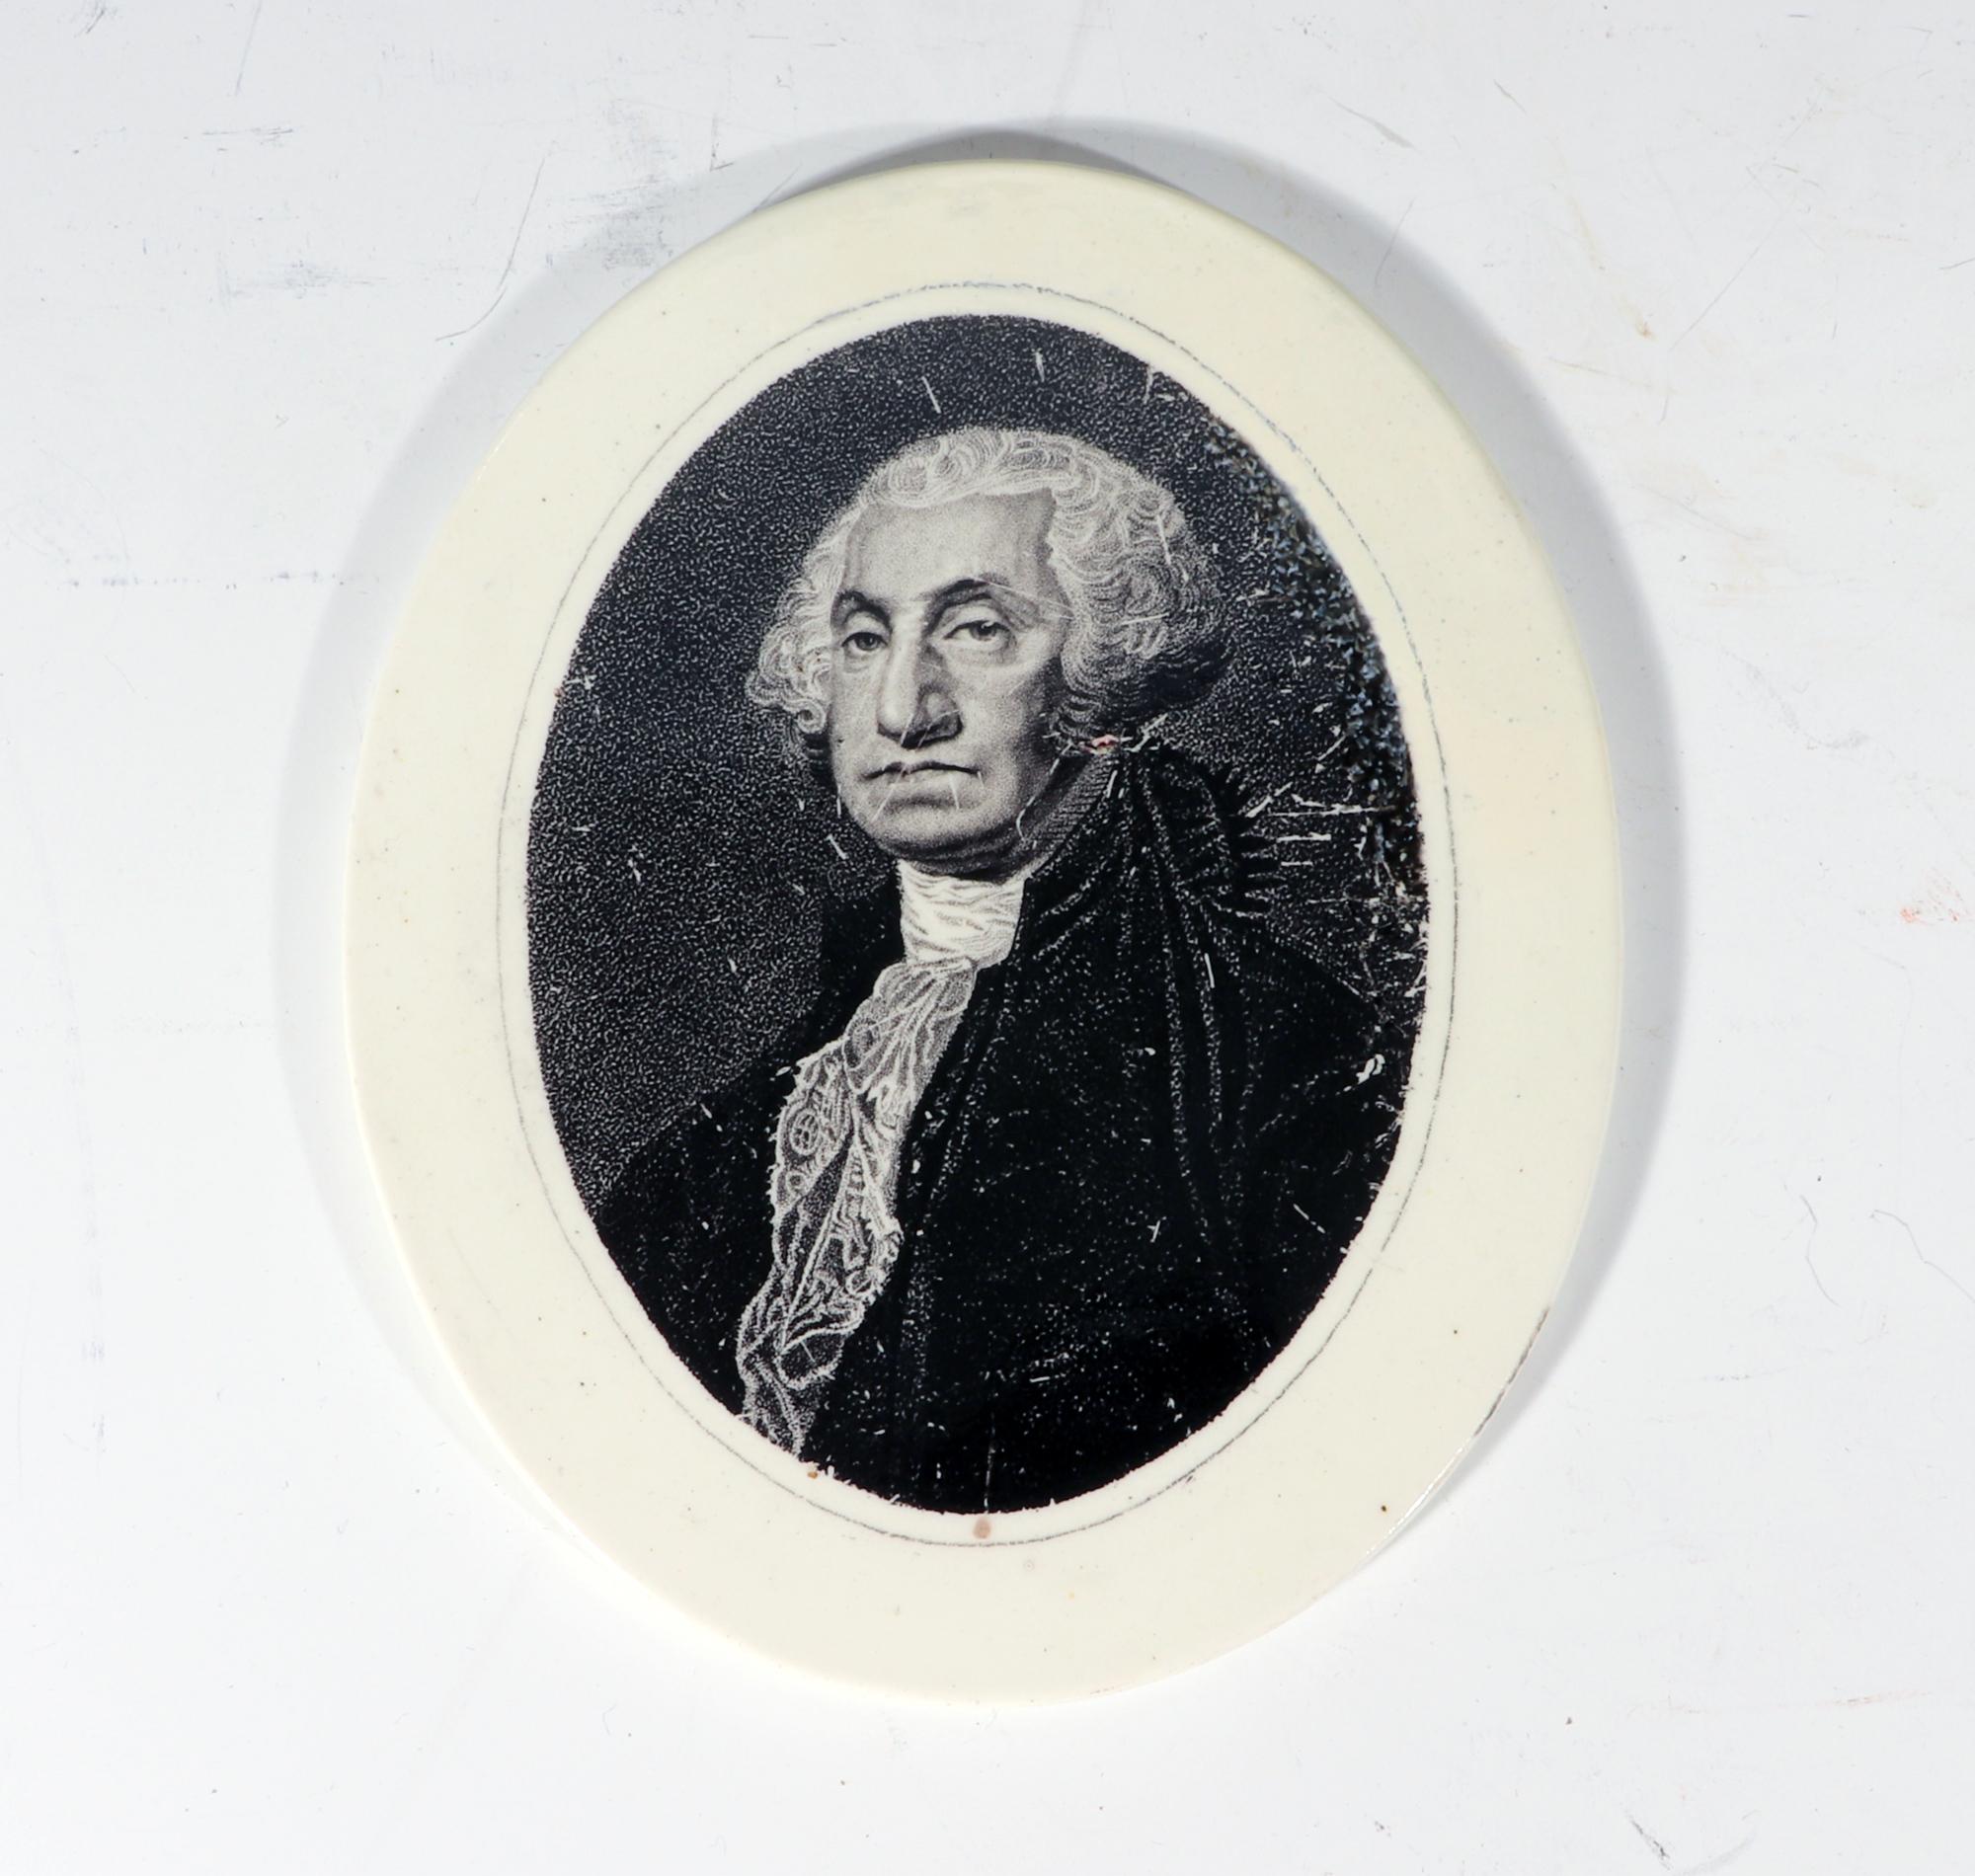 Liverpool Creamware Plaque of George Washington,
Herculaneum Pottery,
Circa 1800

The Liverpool creamware plaque depicts the Gilbert Stuart image of George Washington. The creamware plaque is oval and decorated with a transfer printed image of